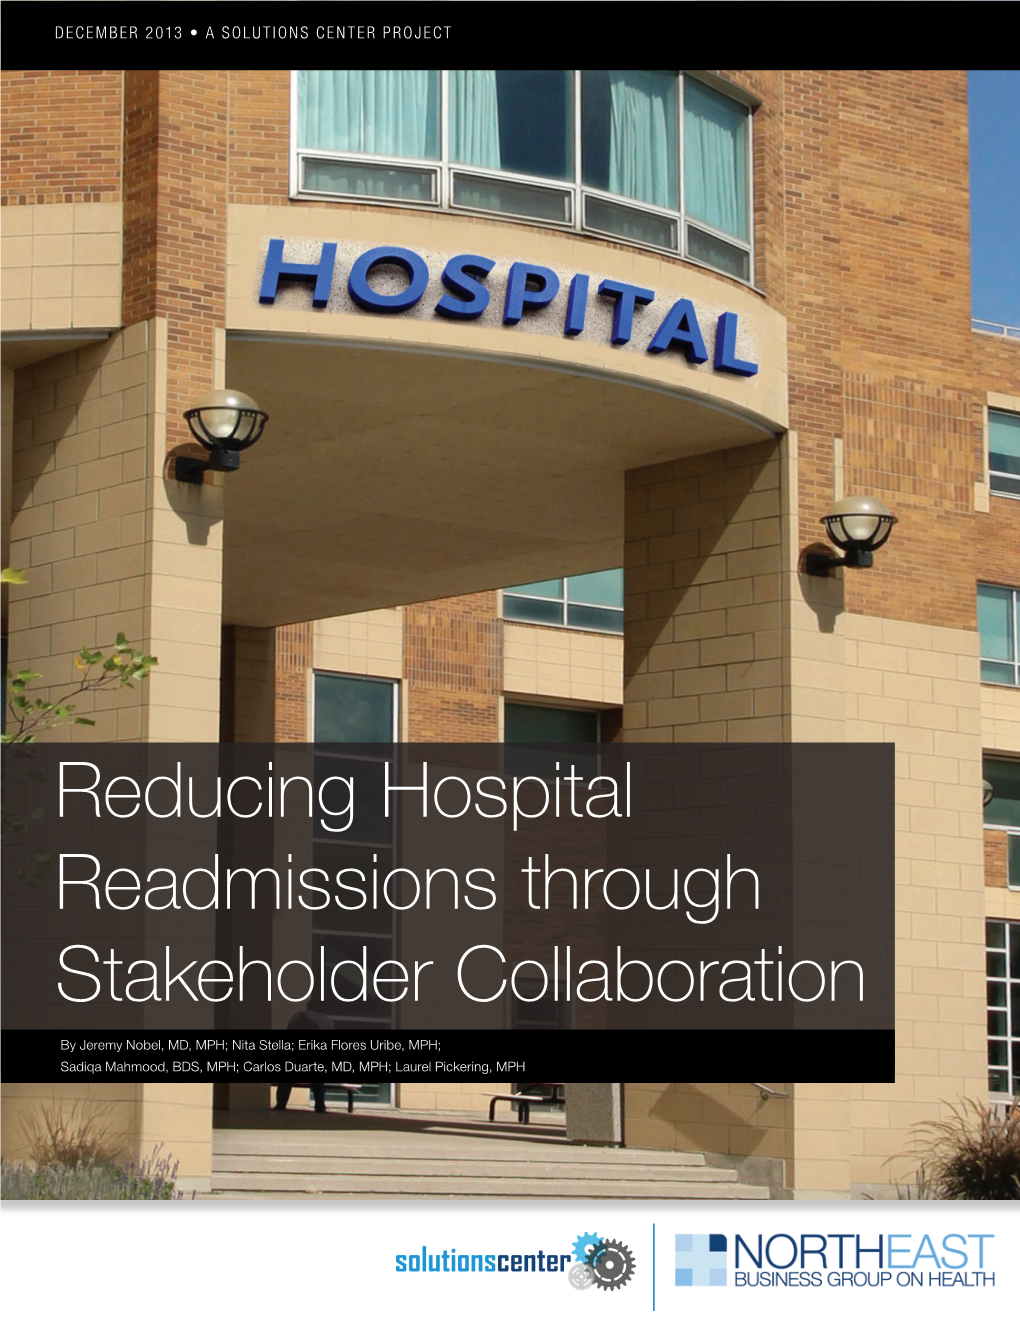 Reducing Hospital Readmissions Through Stakeholder Collaboration